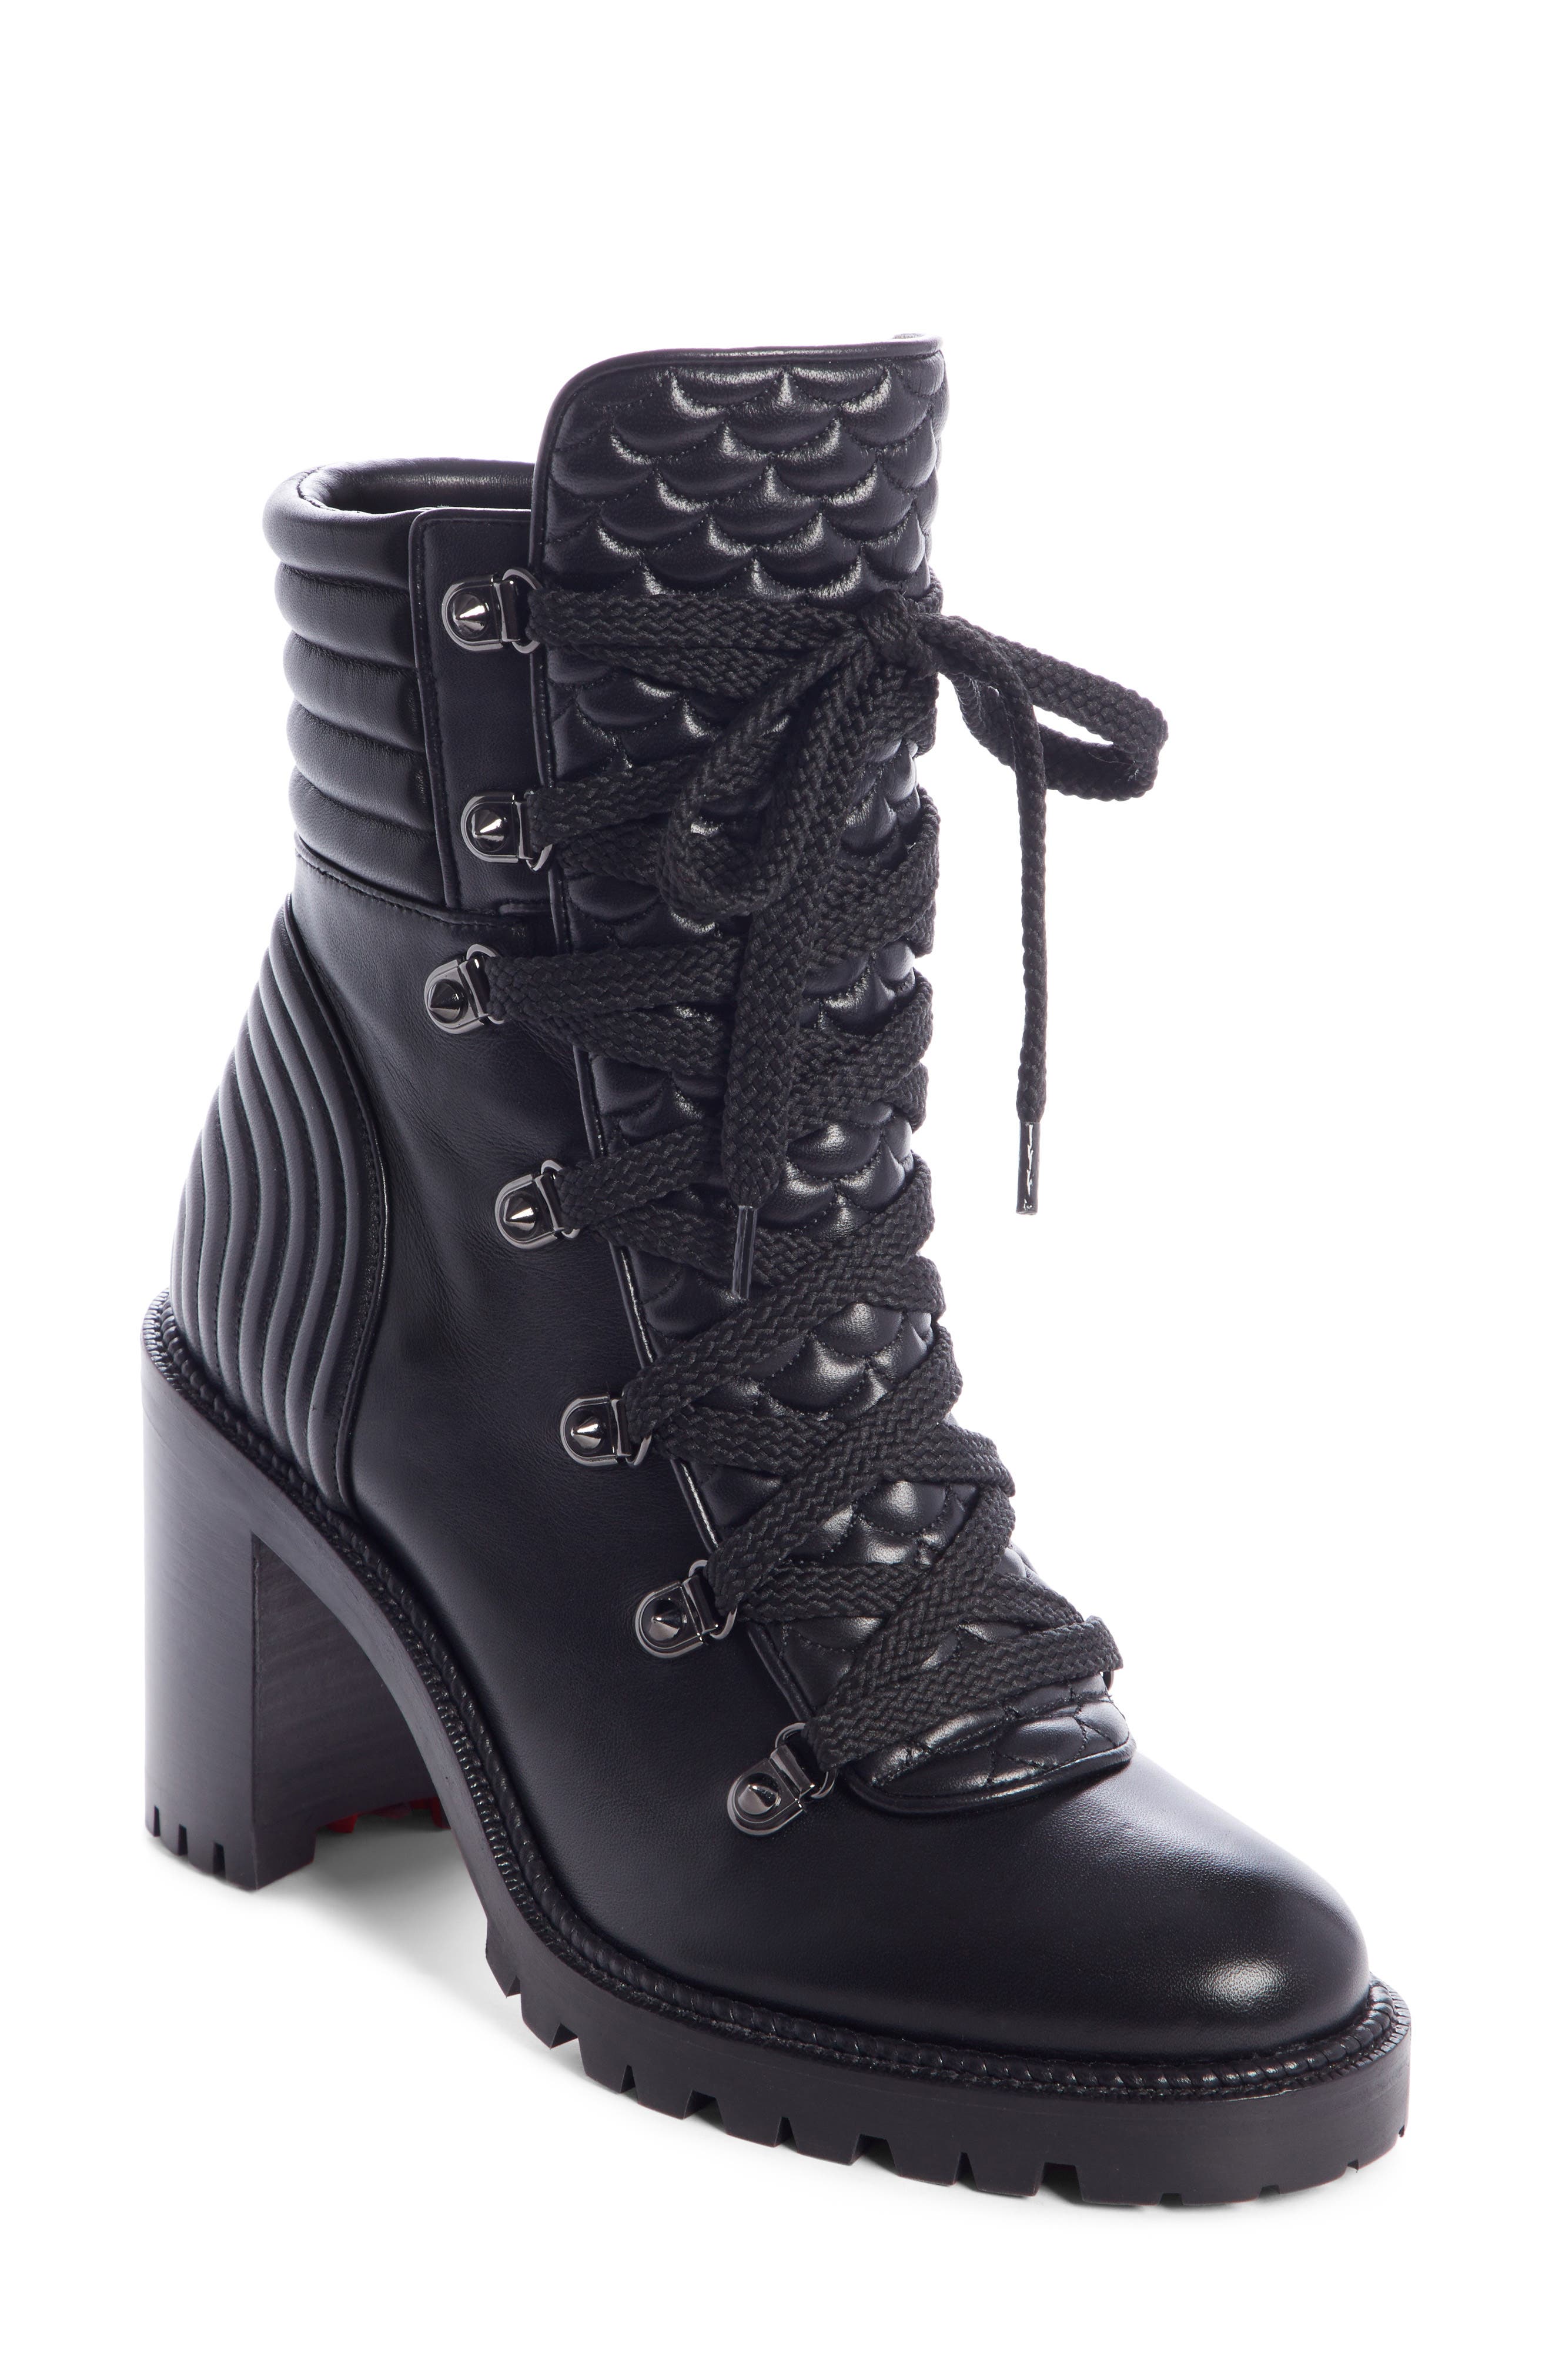 christian louboutin mad boots